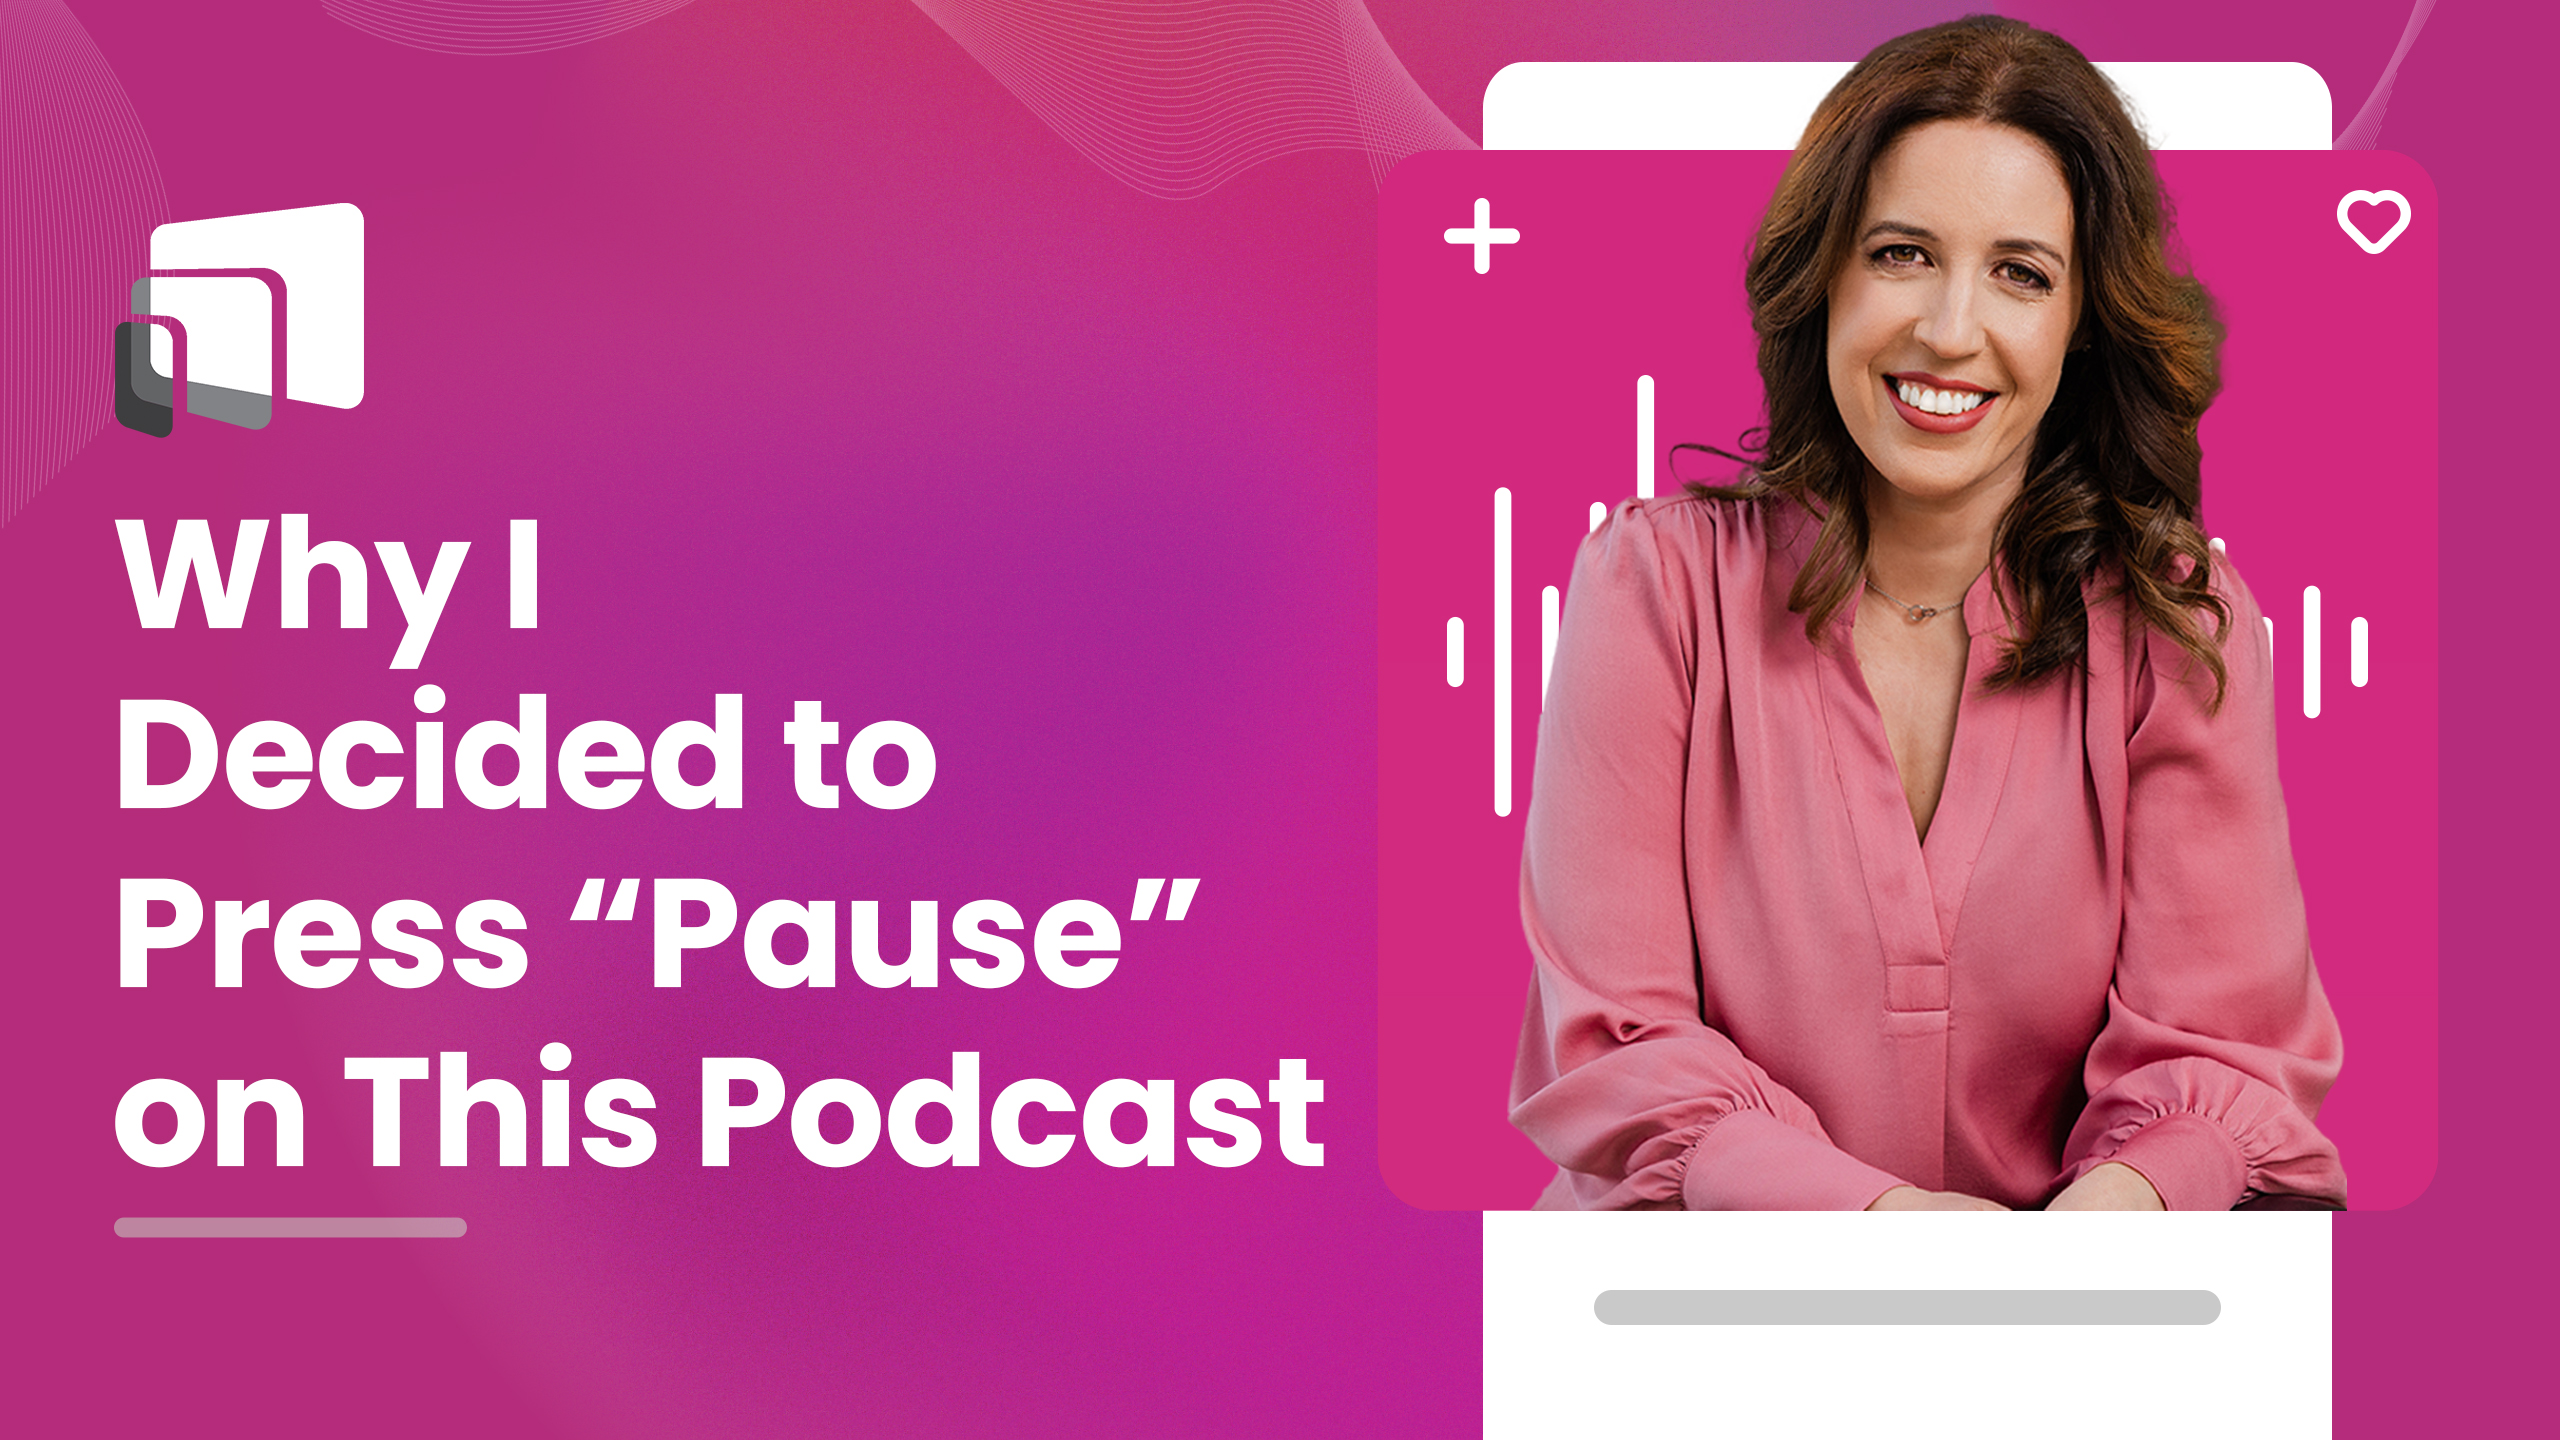 #178: Why I’m pressing “pause” on the podcast